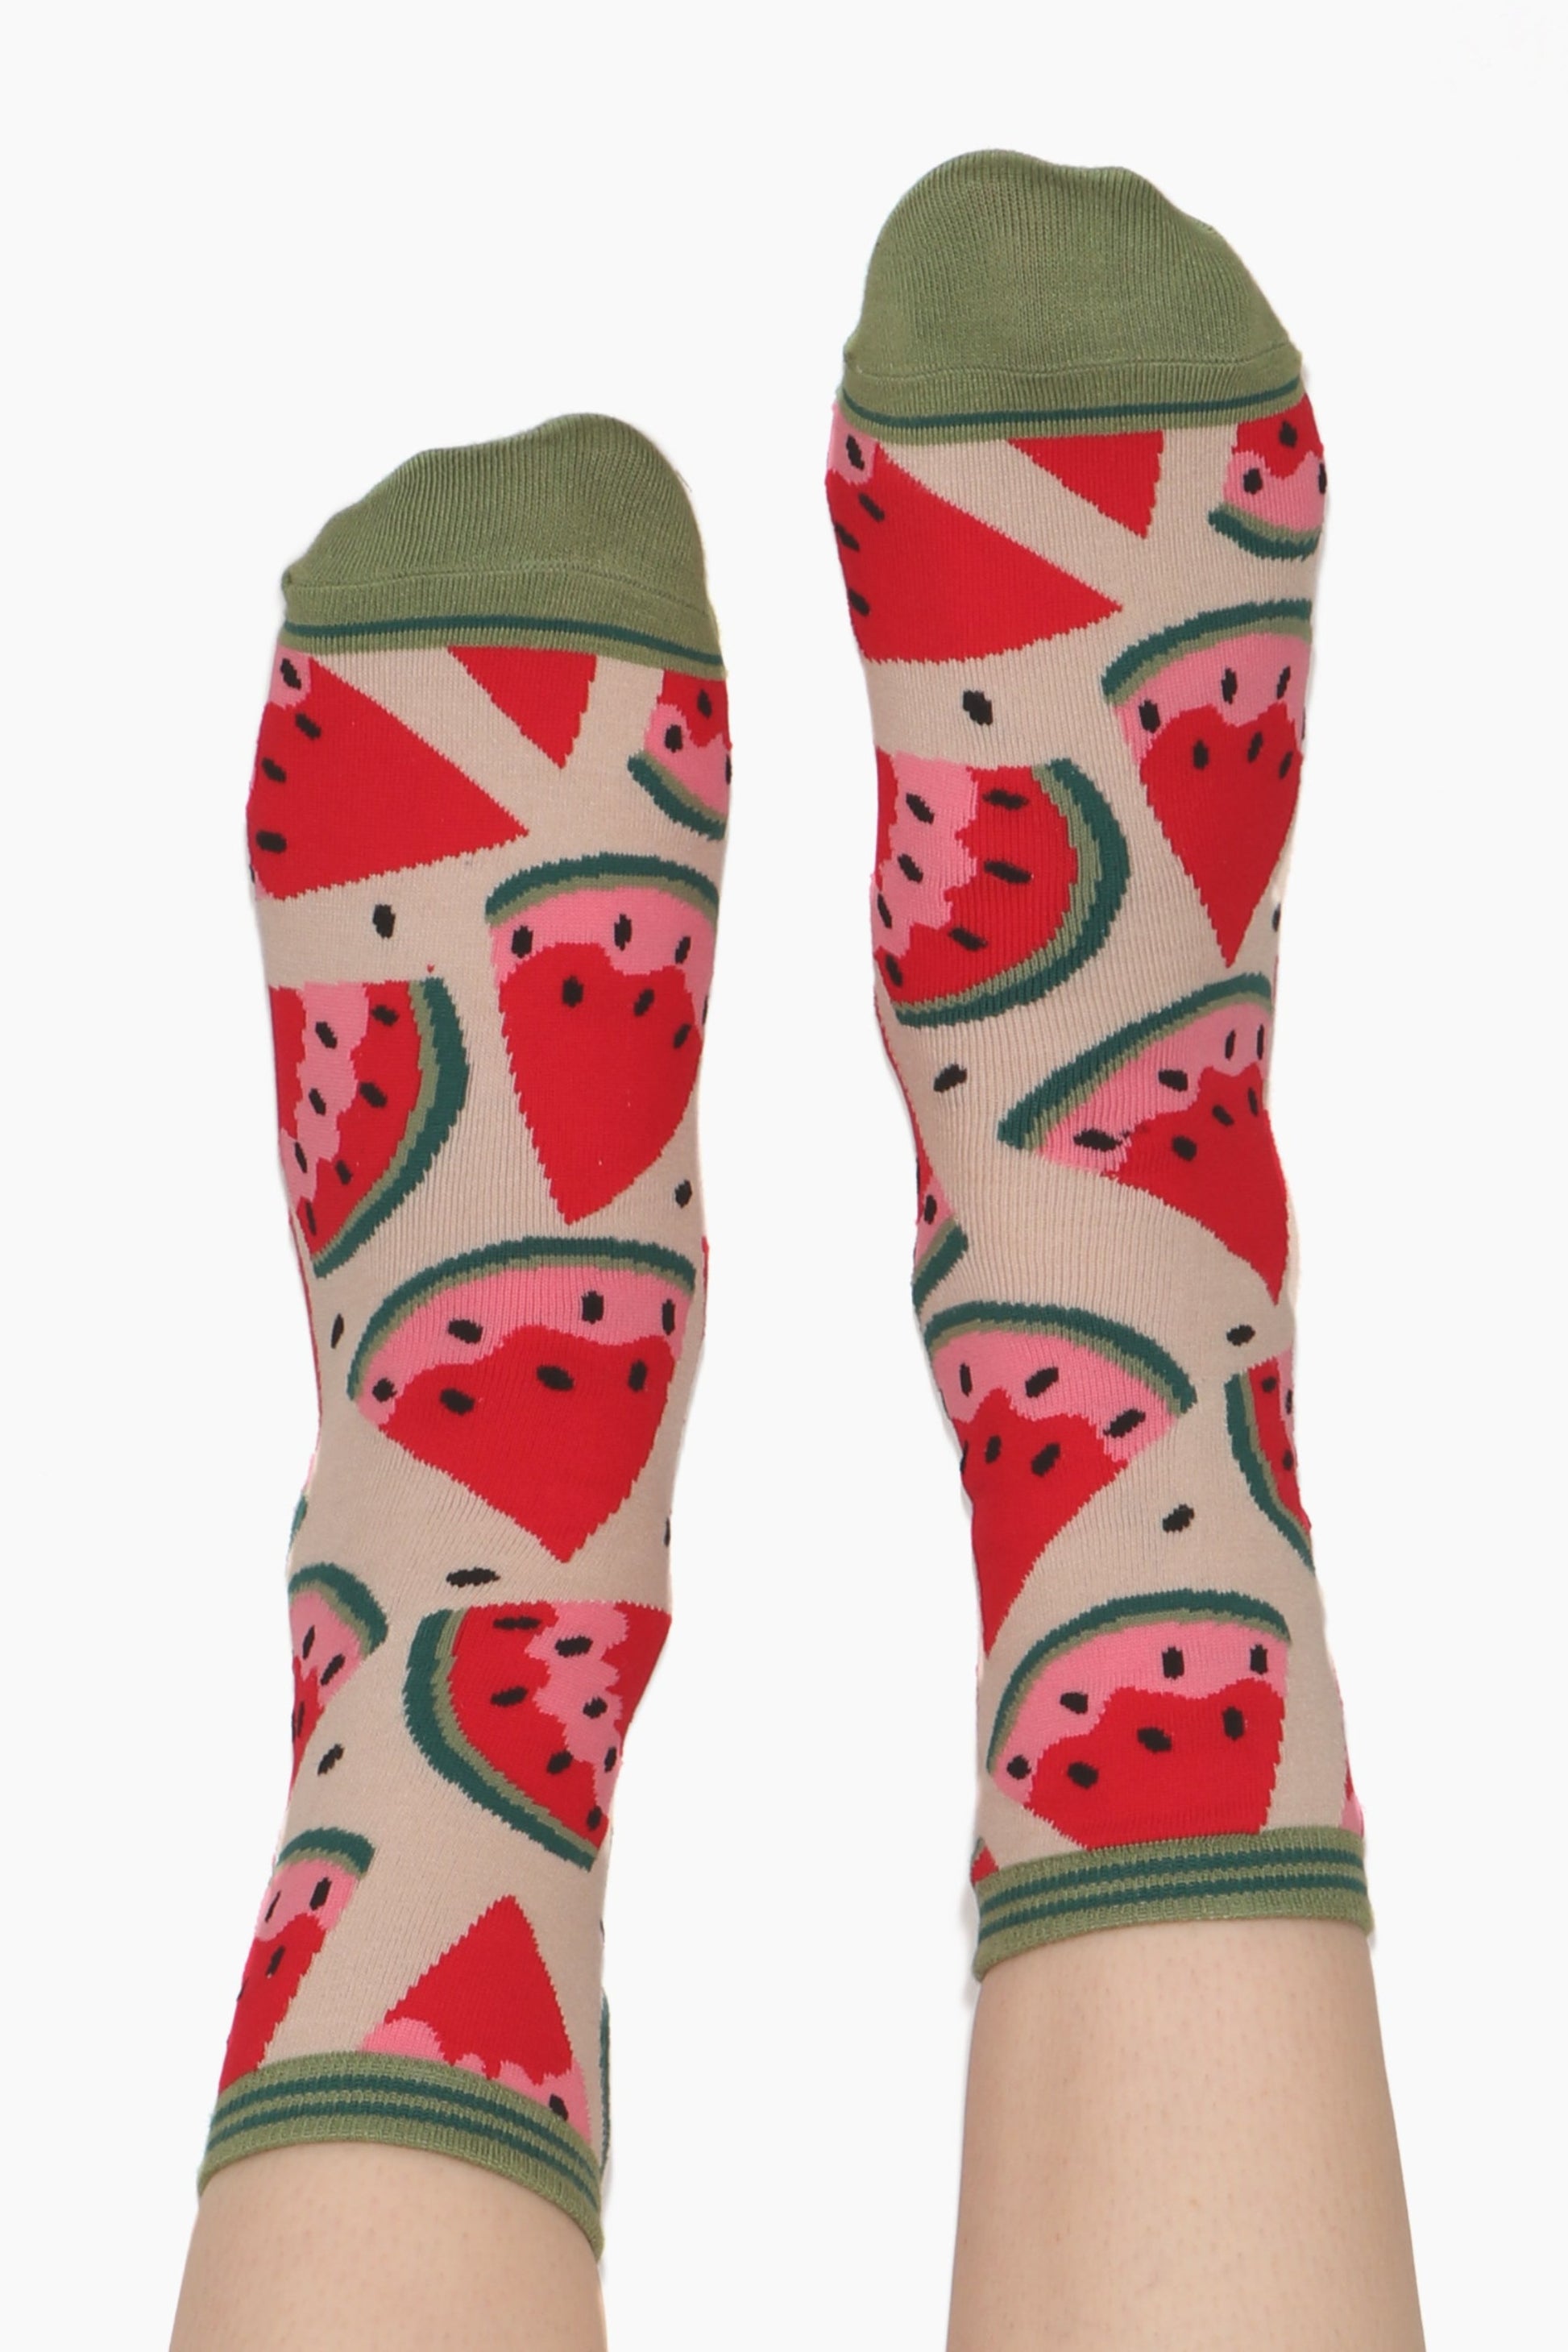 Ladies feet straight in the air wearing watermelon printed bamboo socks. Green contrasting toe and cuff an be seen